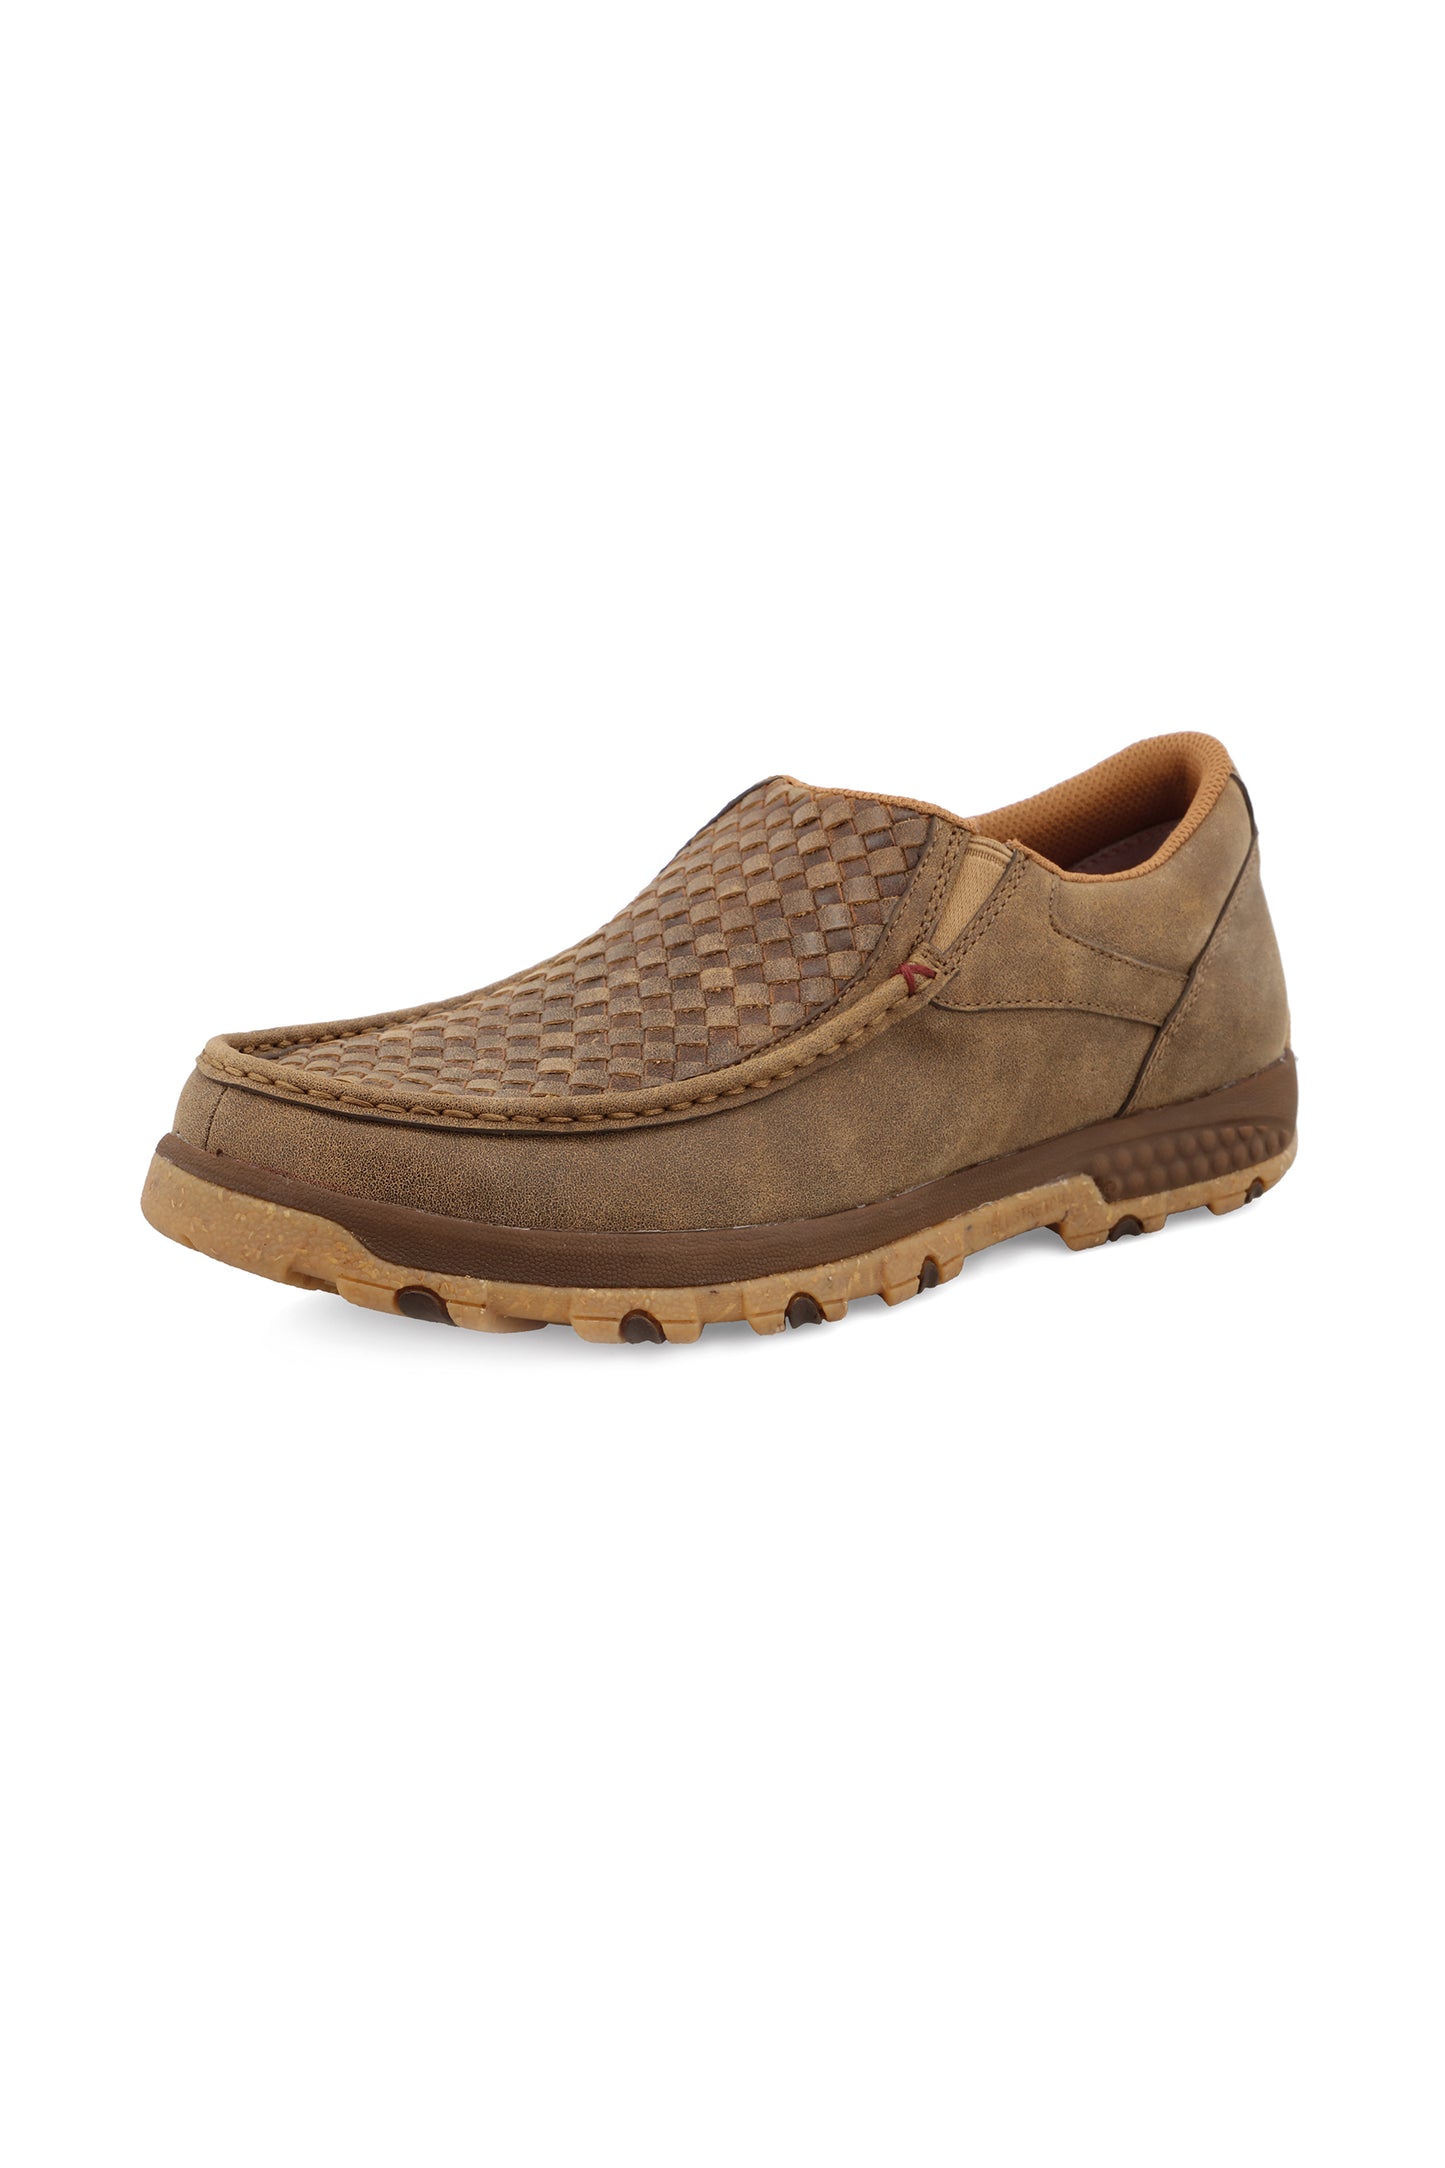 Twisted X Mens Cell Stretch Slip On Driving Moc - Bomber - TCMXC0018